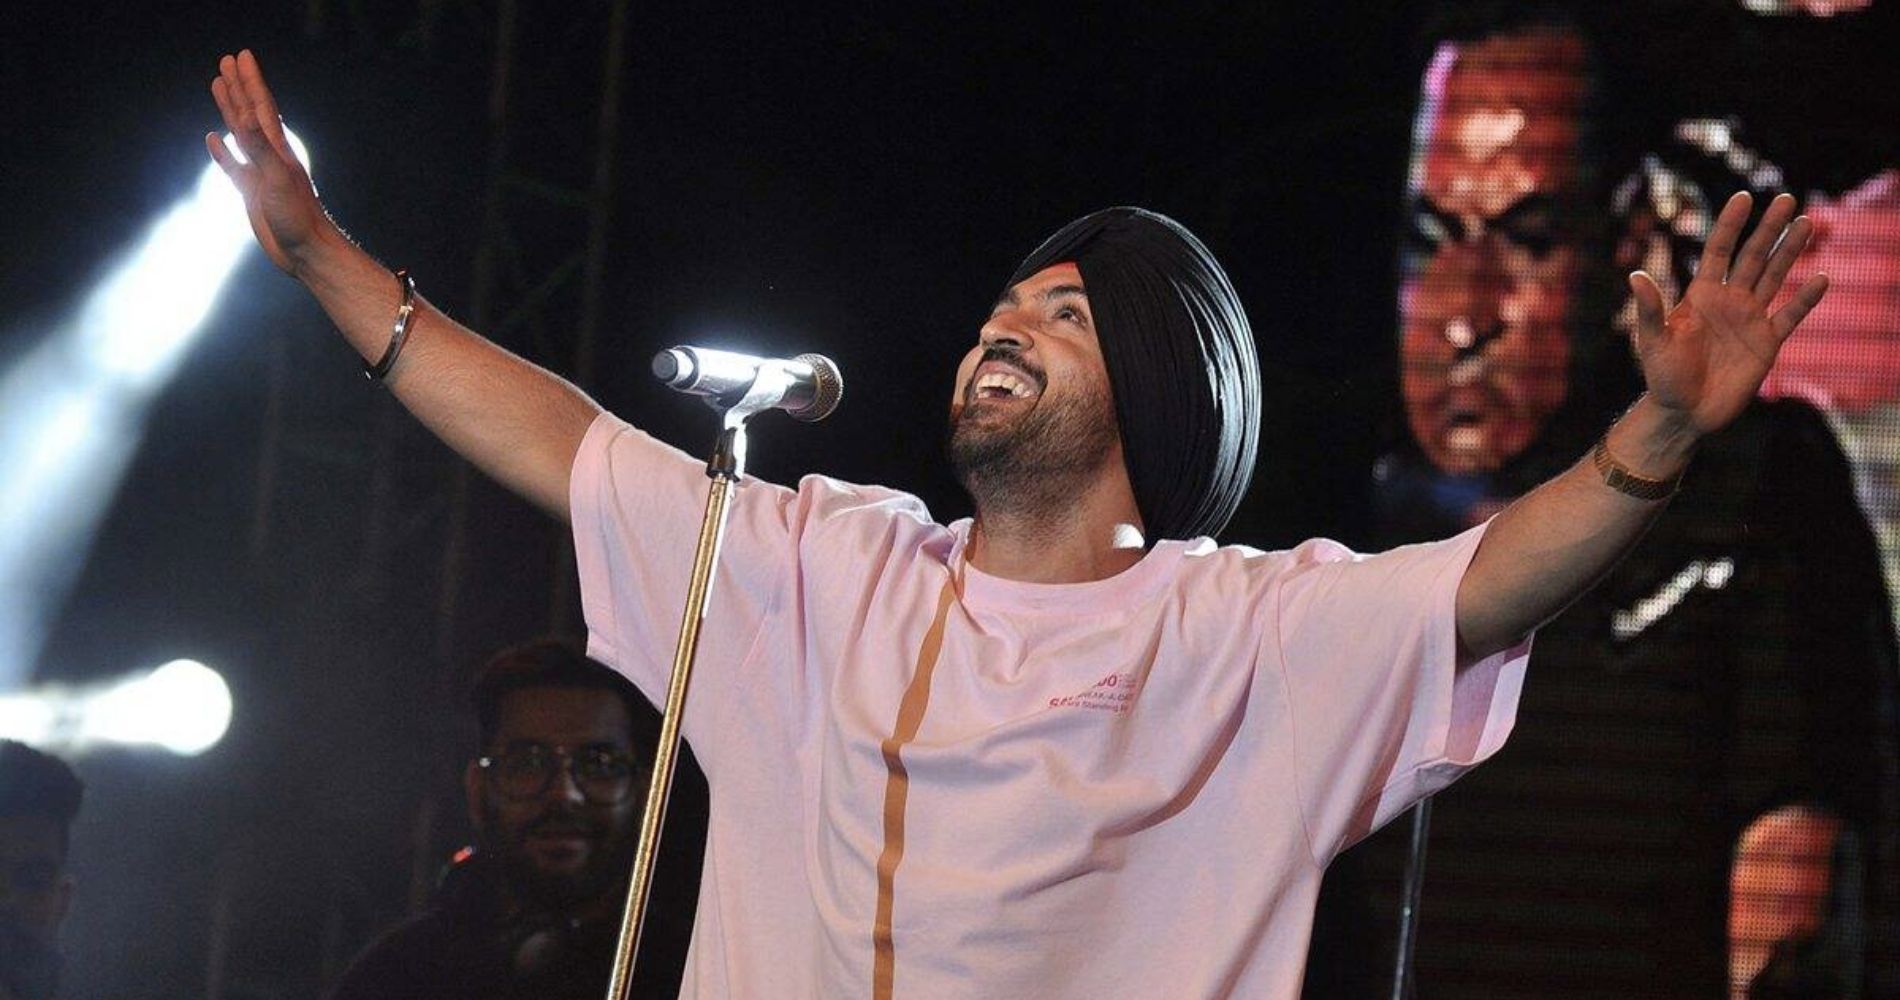 Here is a surprise for you all,Groove with Diljit Dosanjh